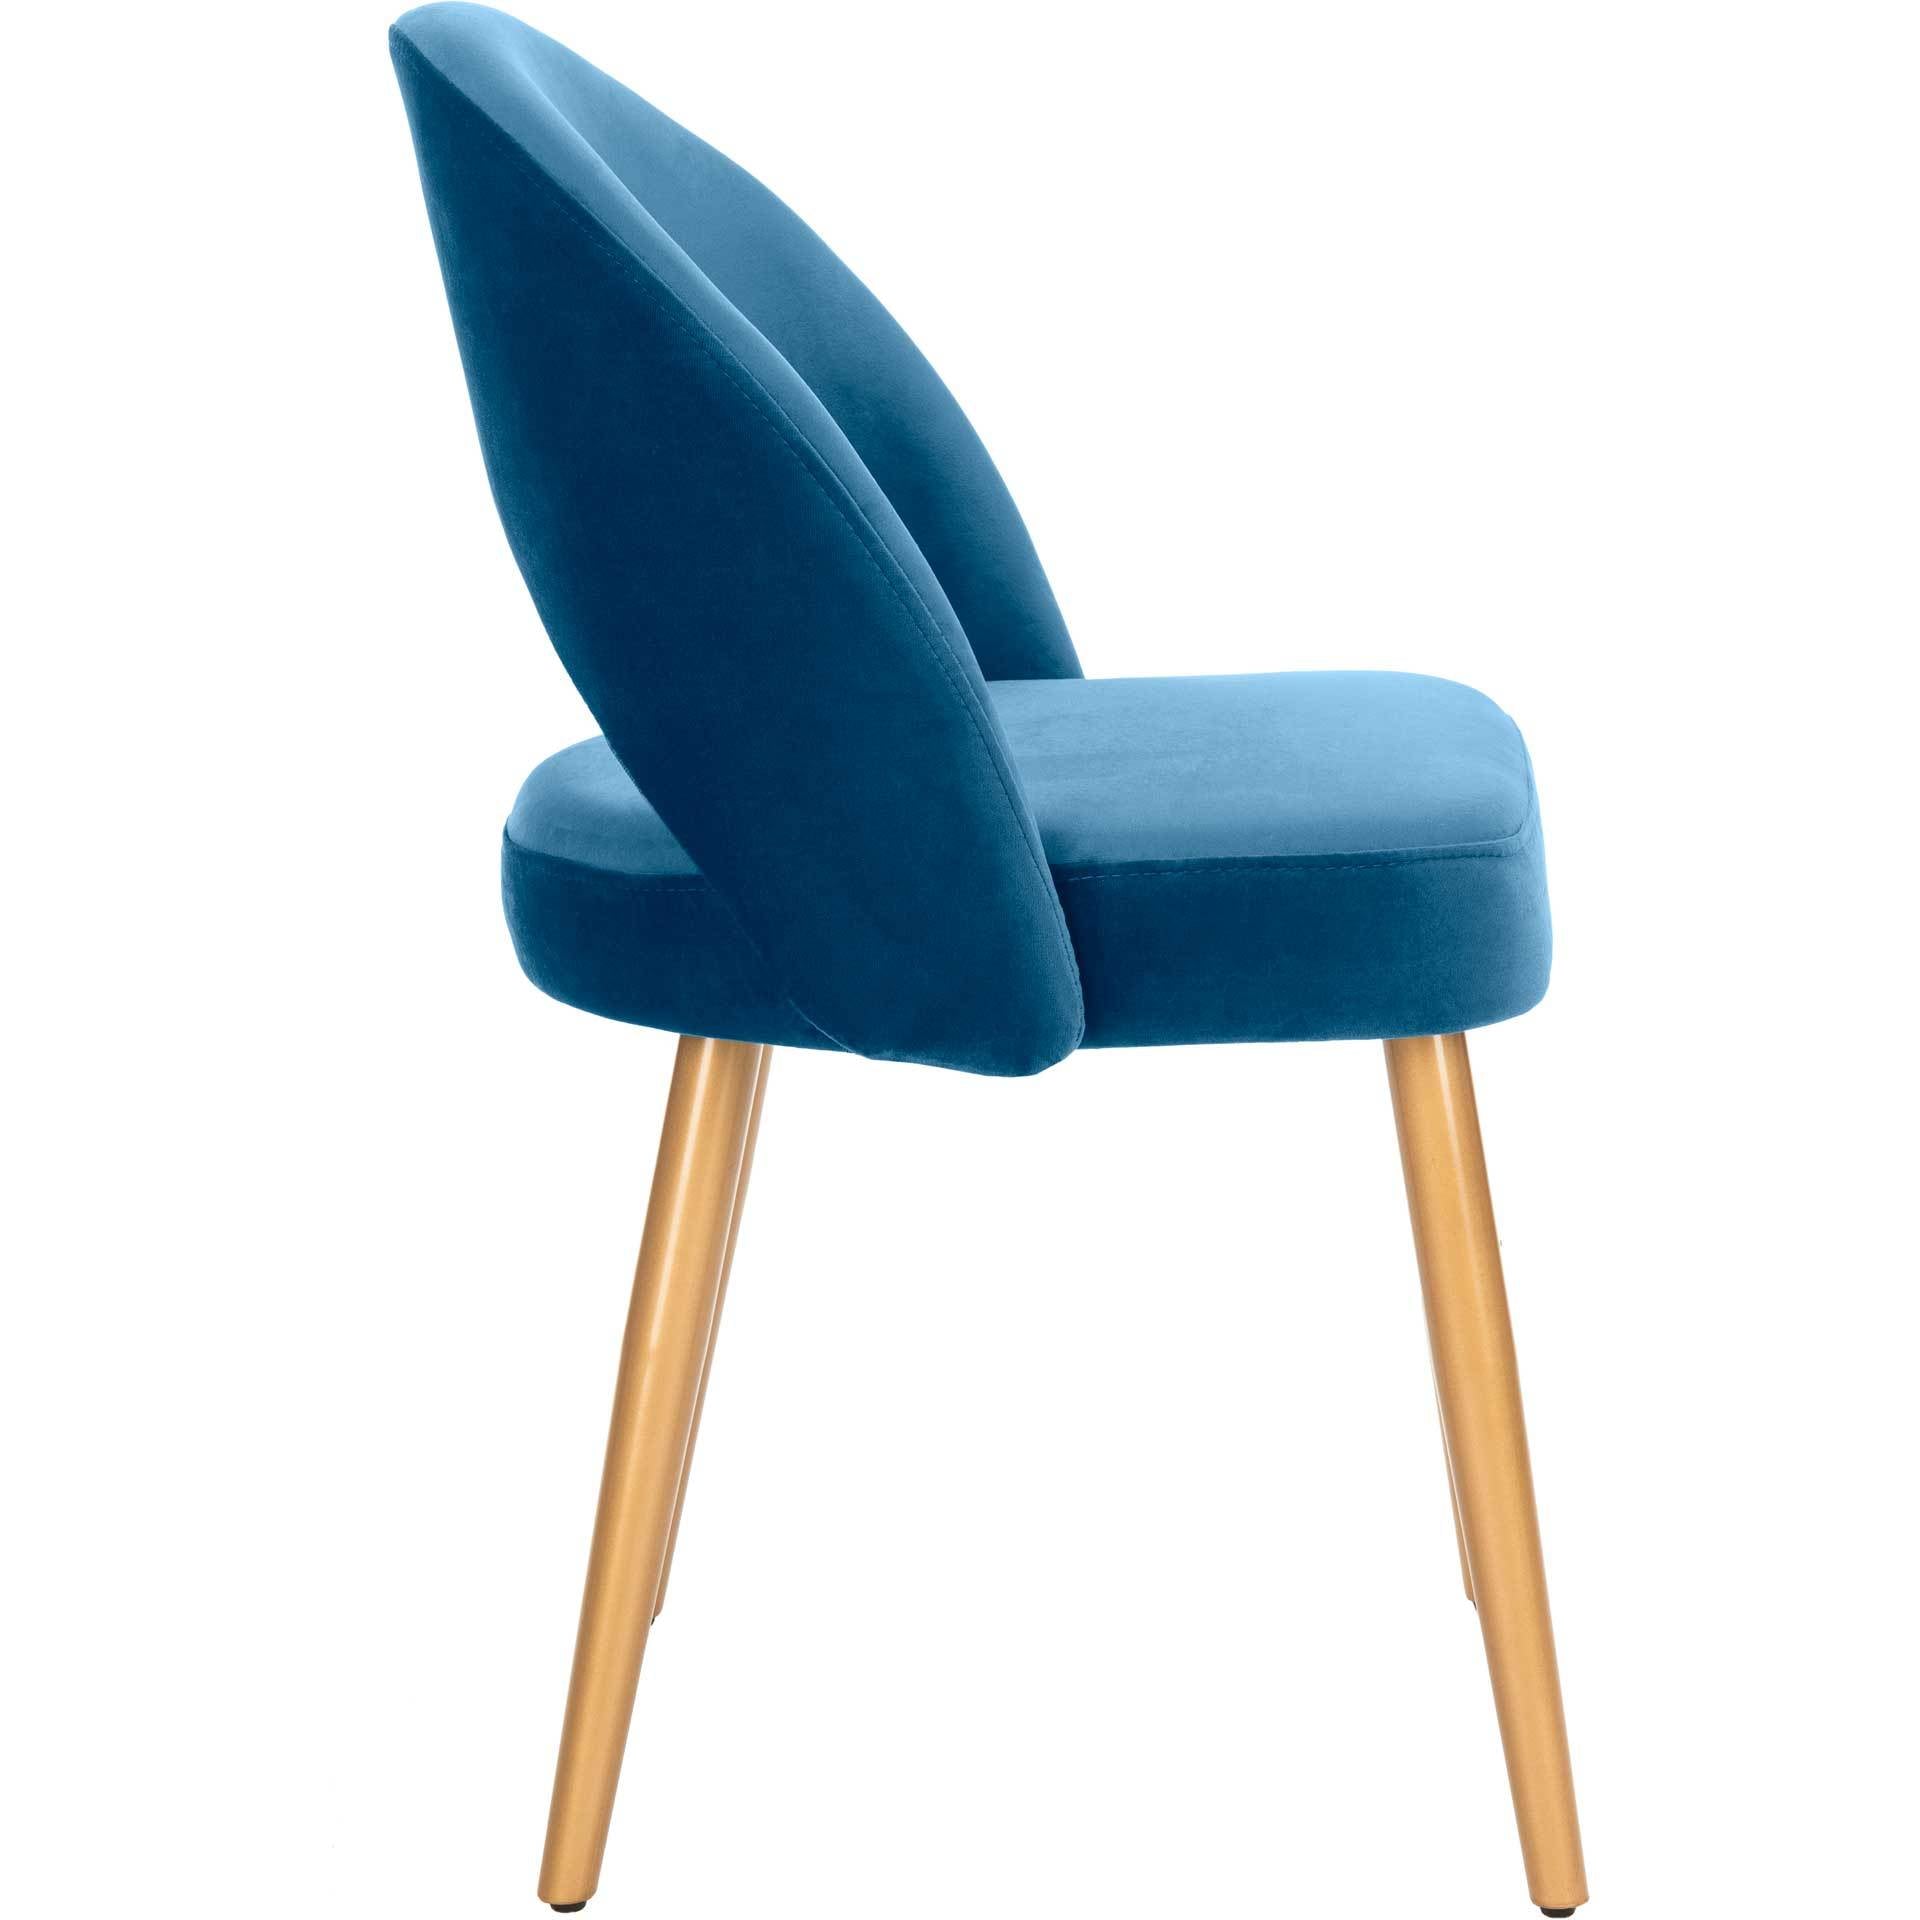 Gia Retro Dining Chair Navy/Gold (Set of 2)